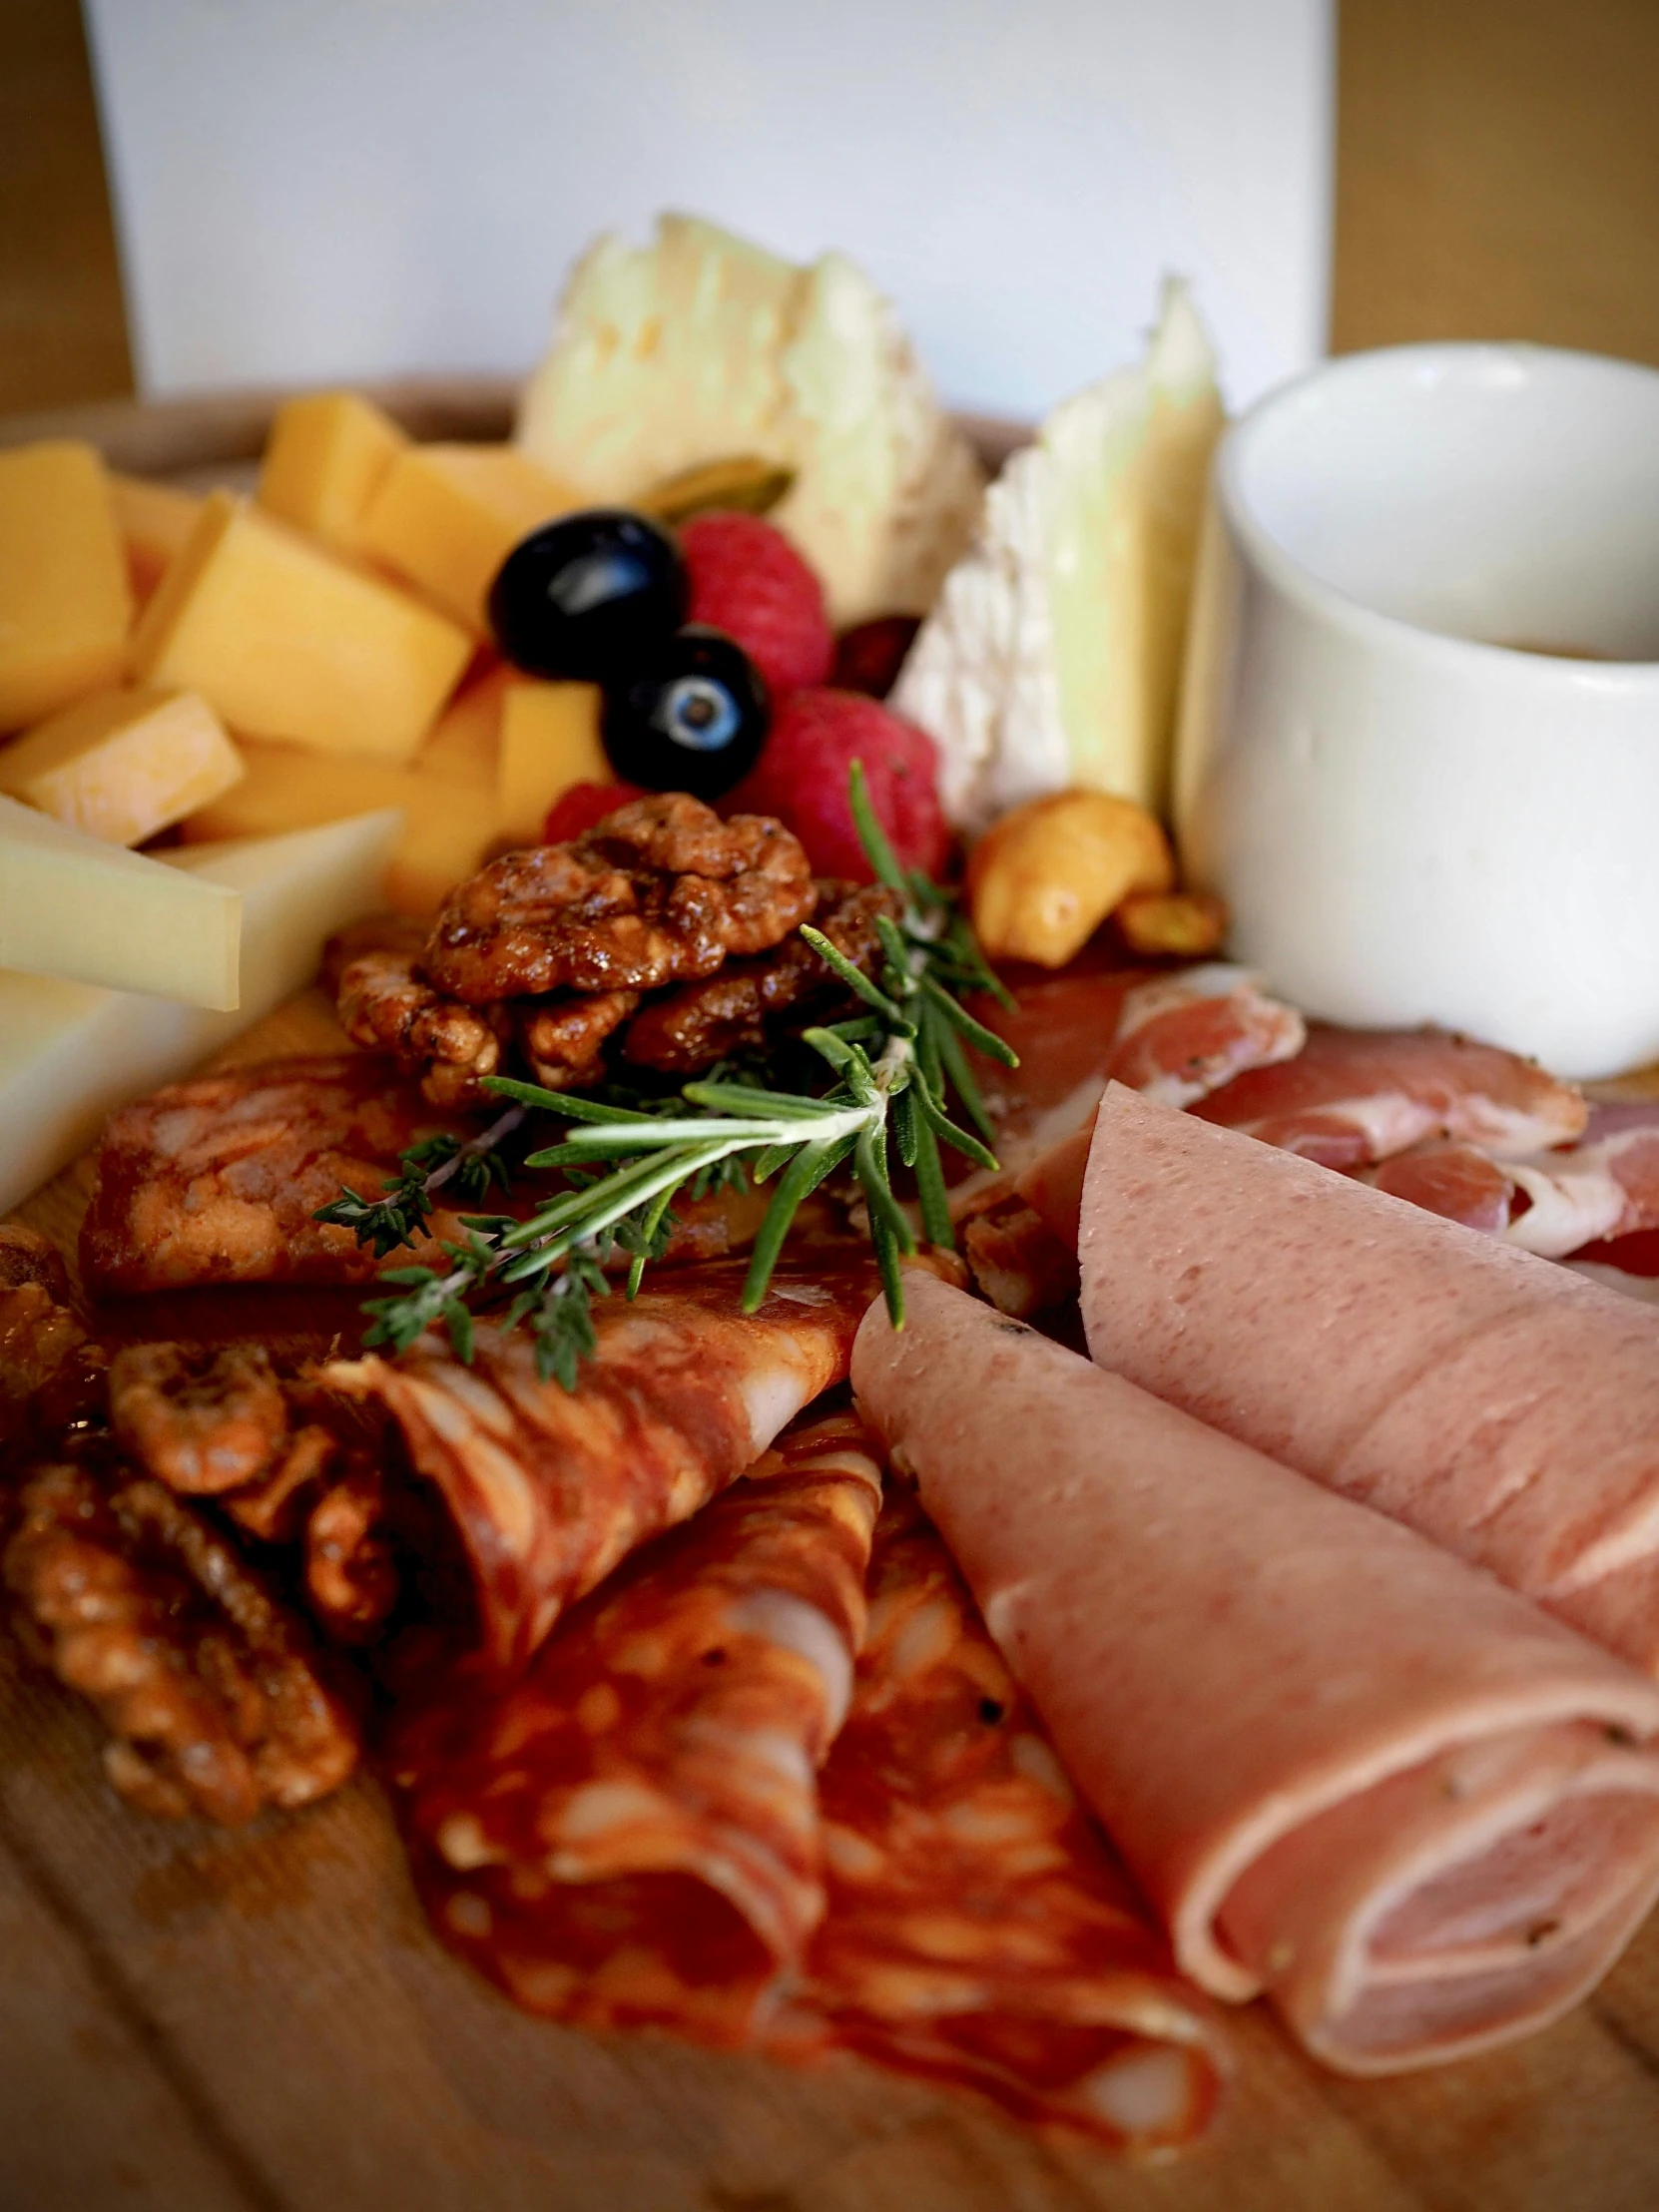 the meat platter includes different types of meats, cheeses and other snacks